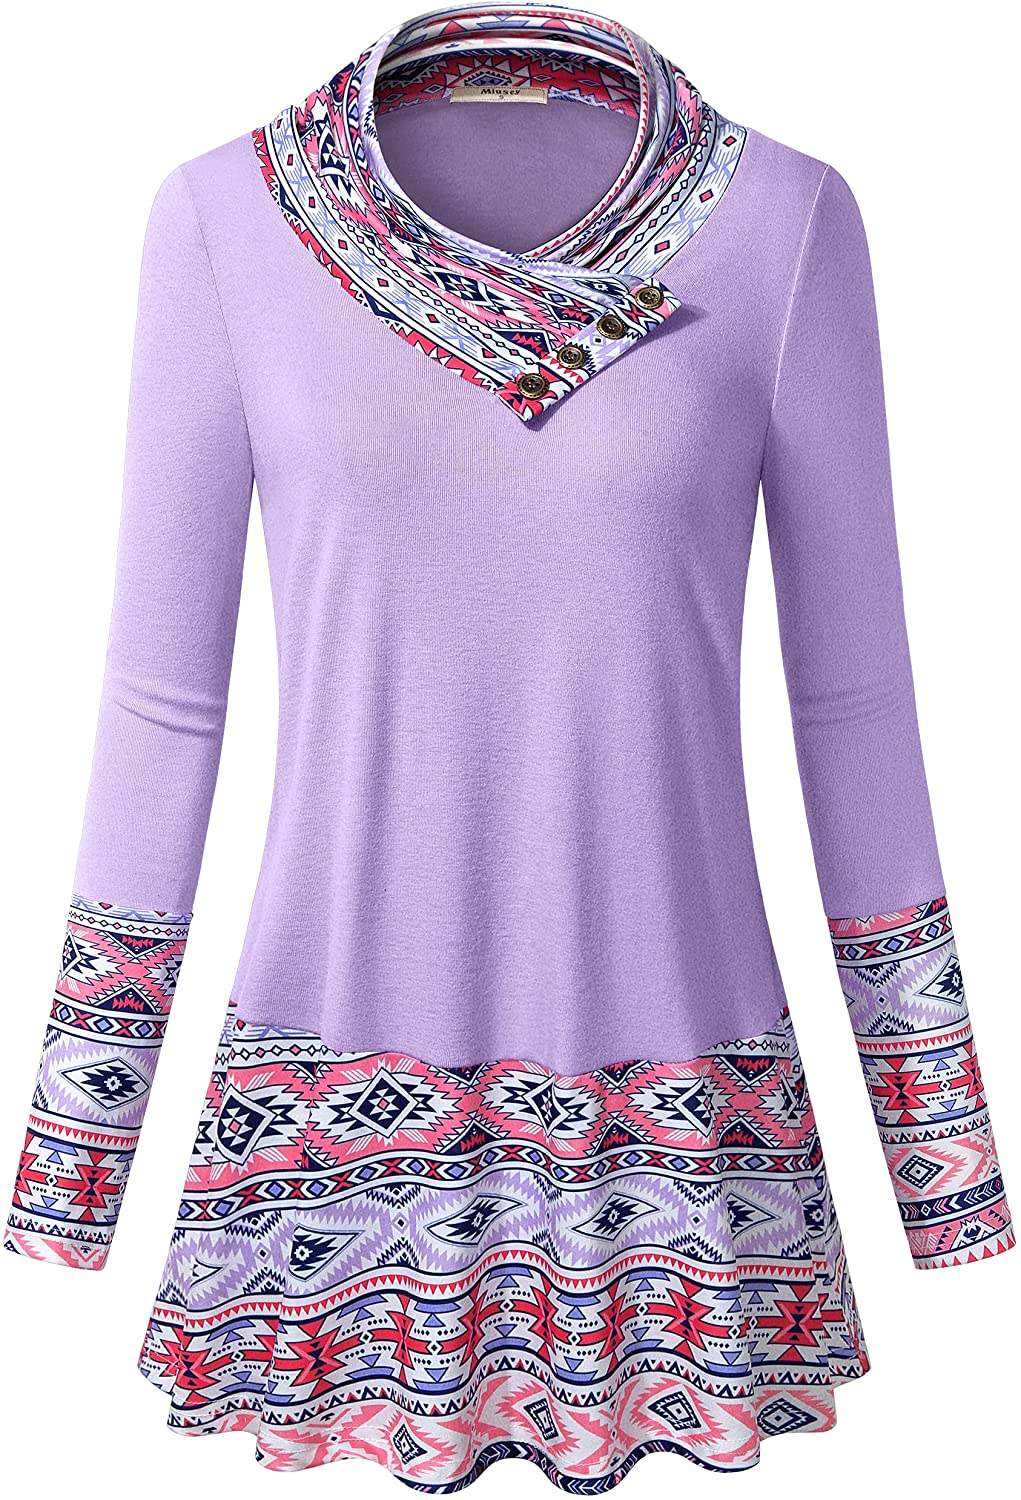 Miusey Women's Long Sleeve Cowl Neck Form Fitting Casual Tunic Top Blouse